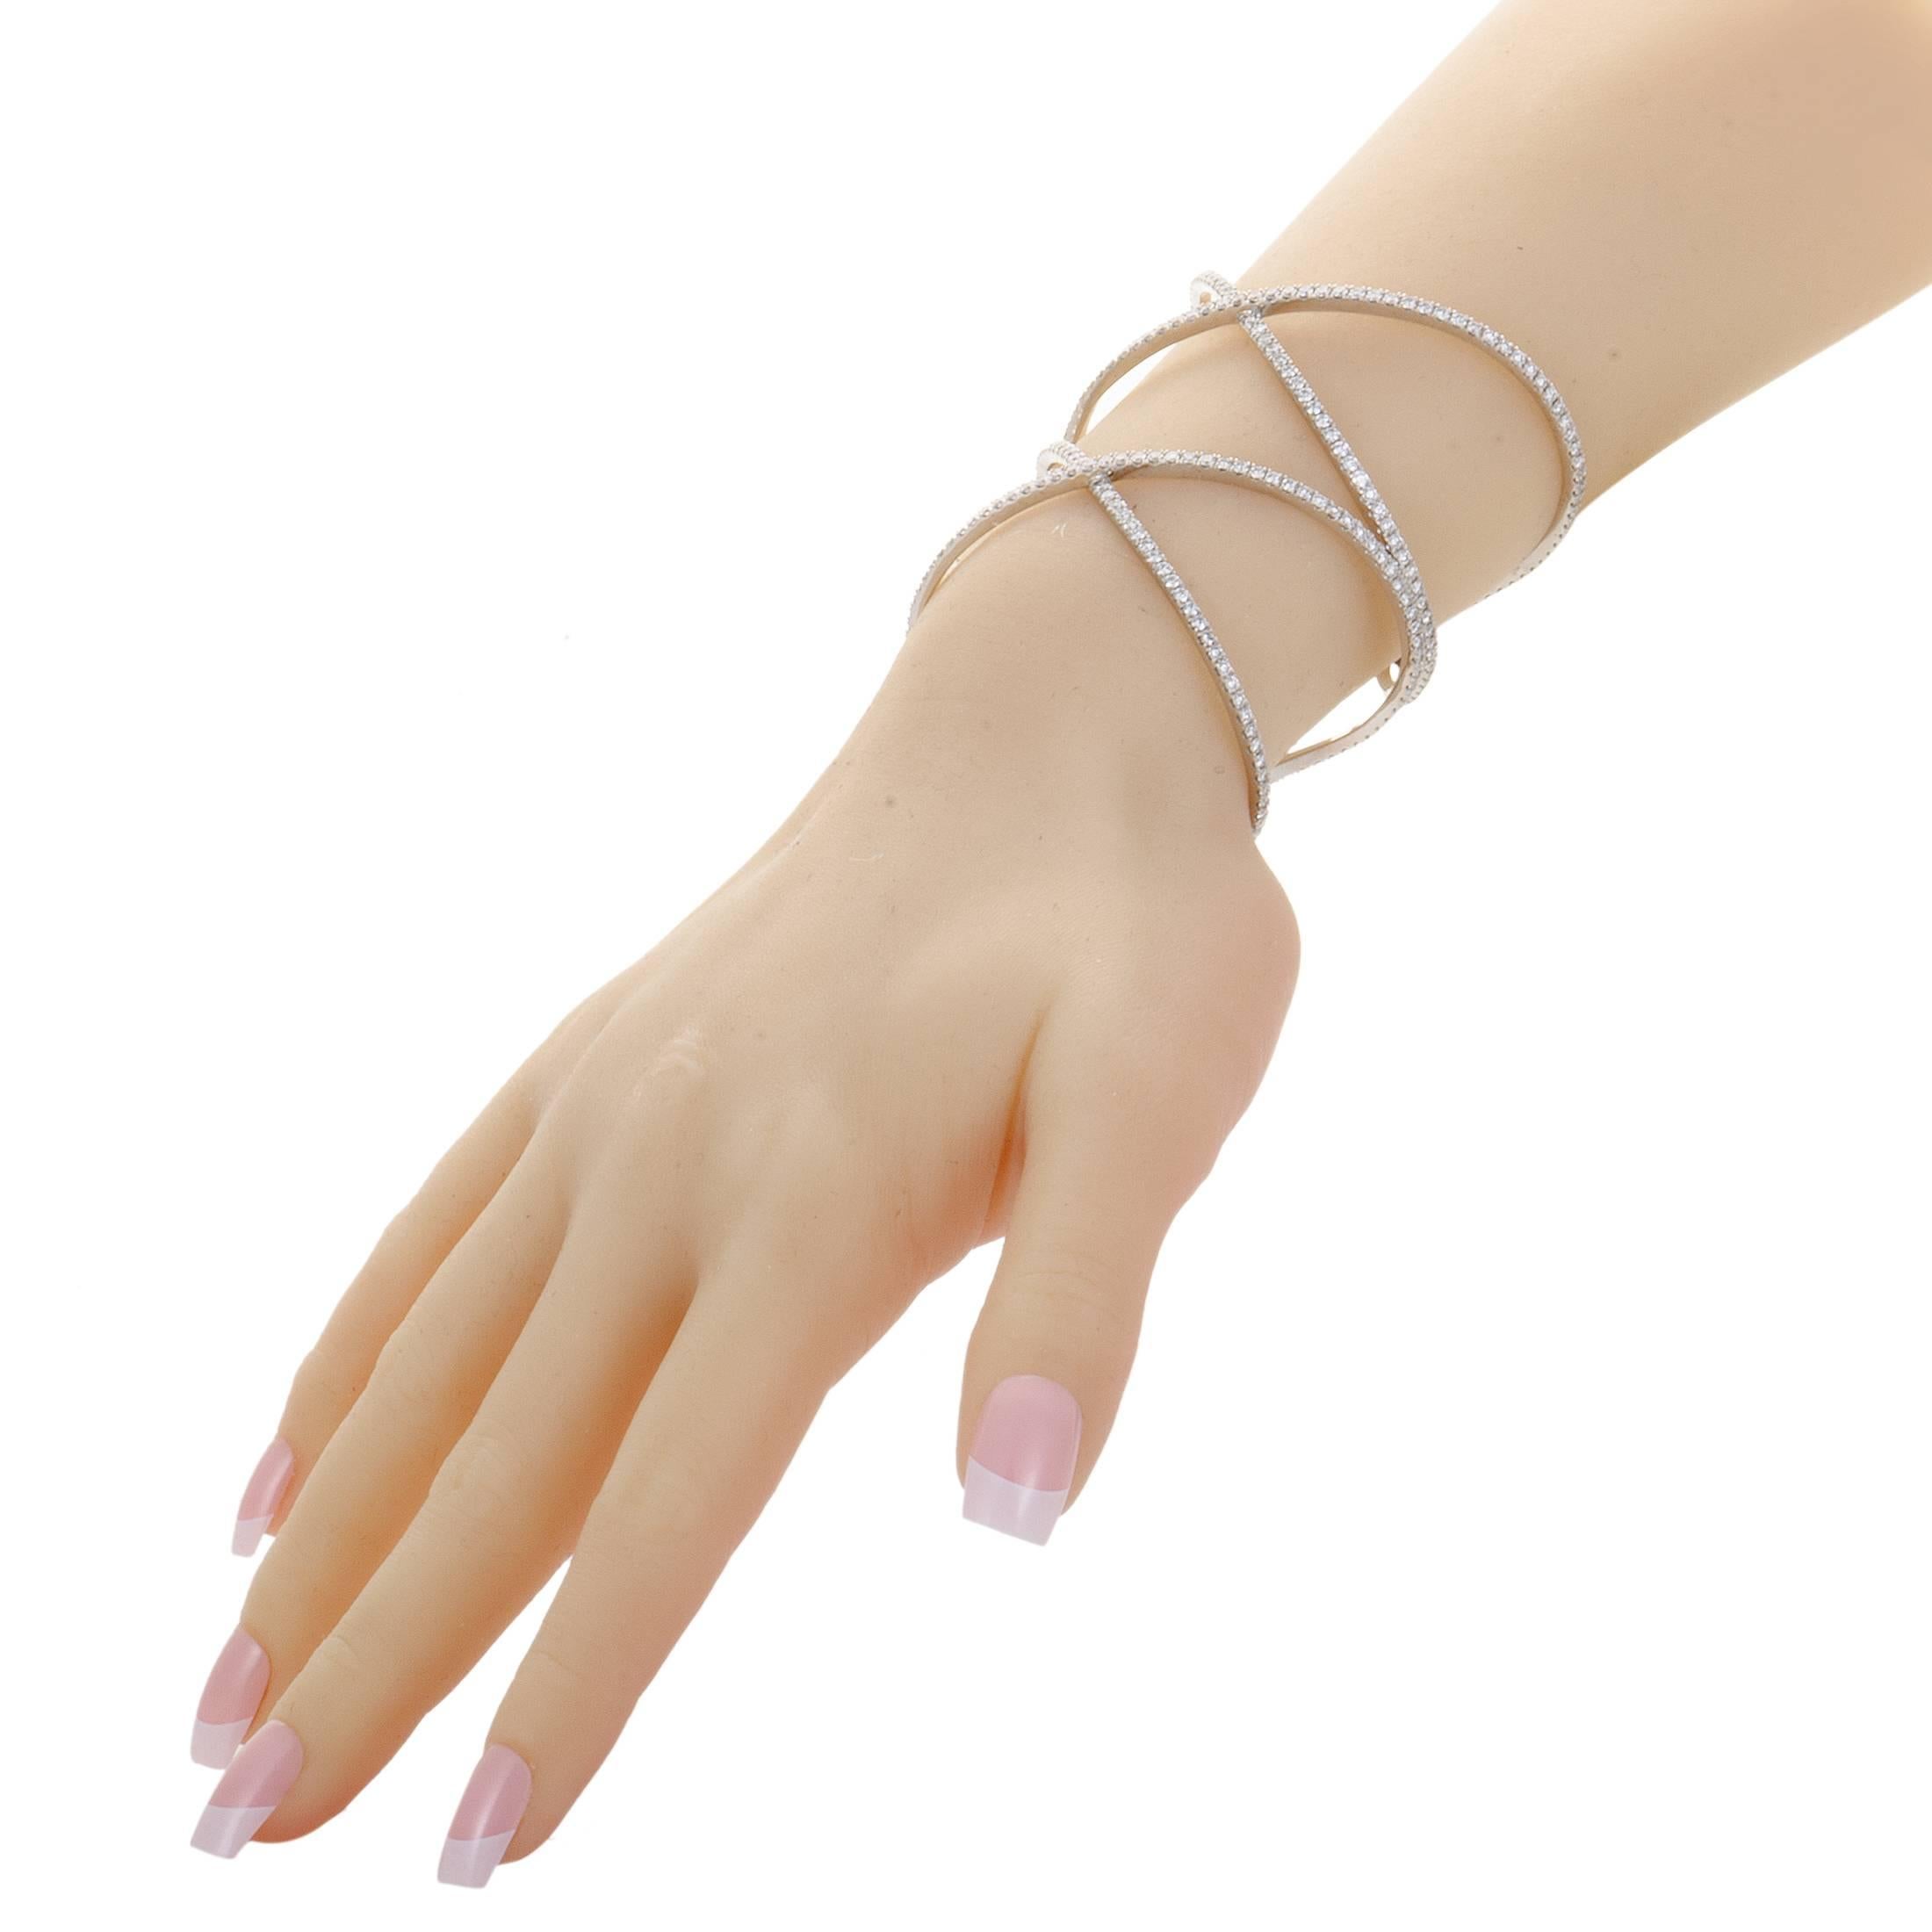 Elegant simplicity and graceful lines produce a delightful allure in this sumptuous bracelet from Dena Kemp which is expertly crafted from splendid 18K white gold and neatly lined with FG-color diamonds of VS clarity weighing in total 8.71